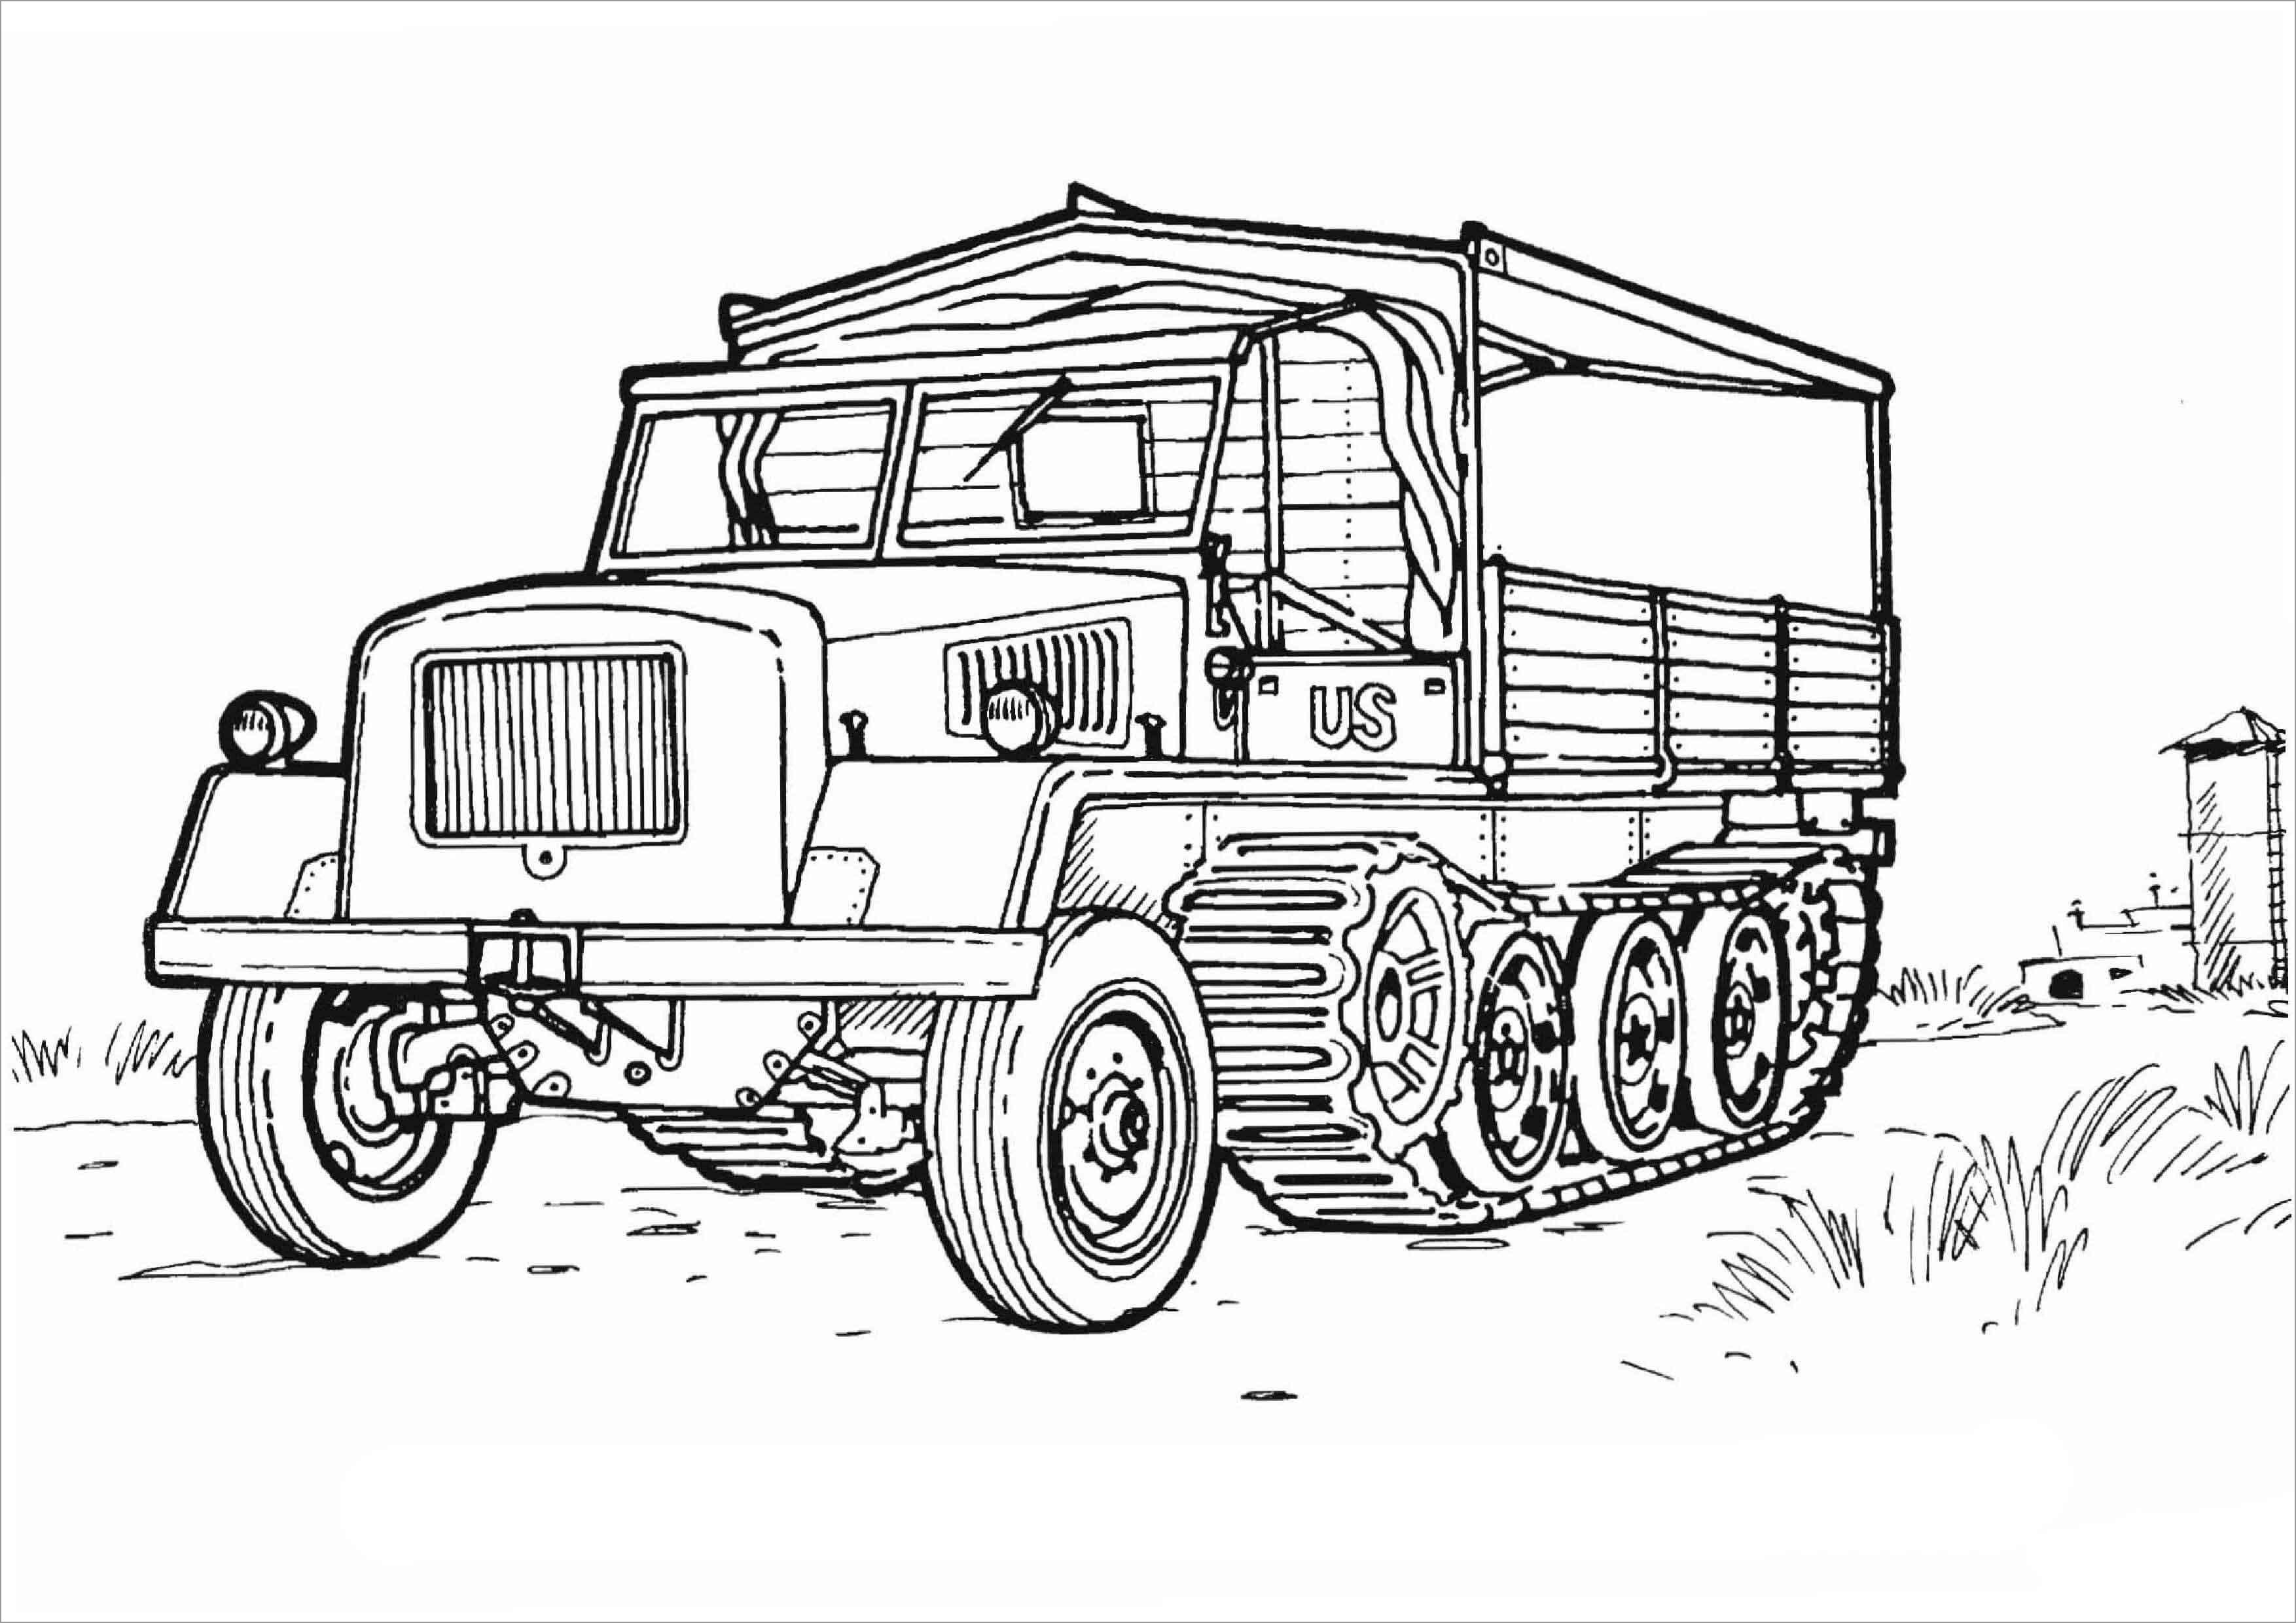 Reduced Army Vehicles Coloring Page